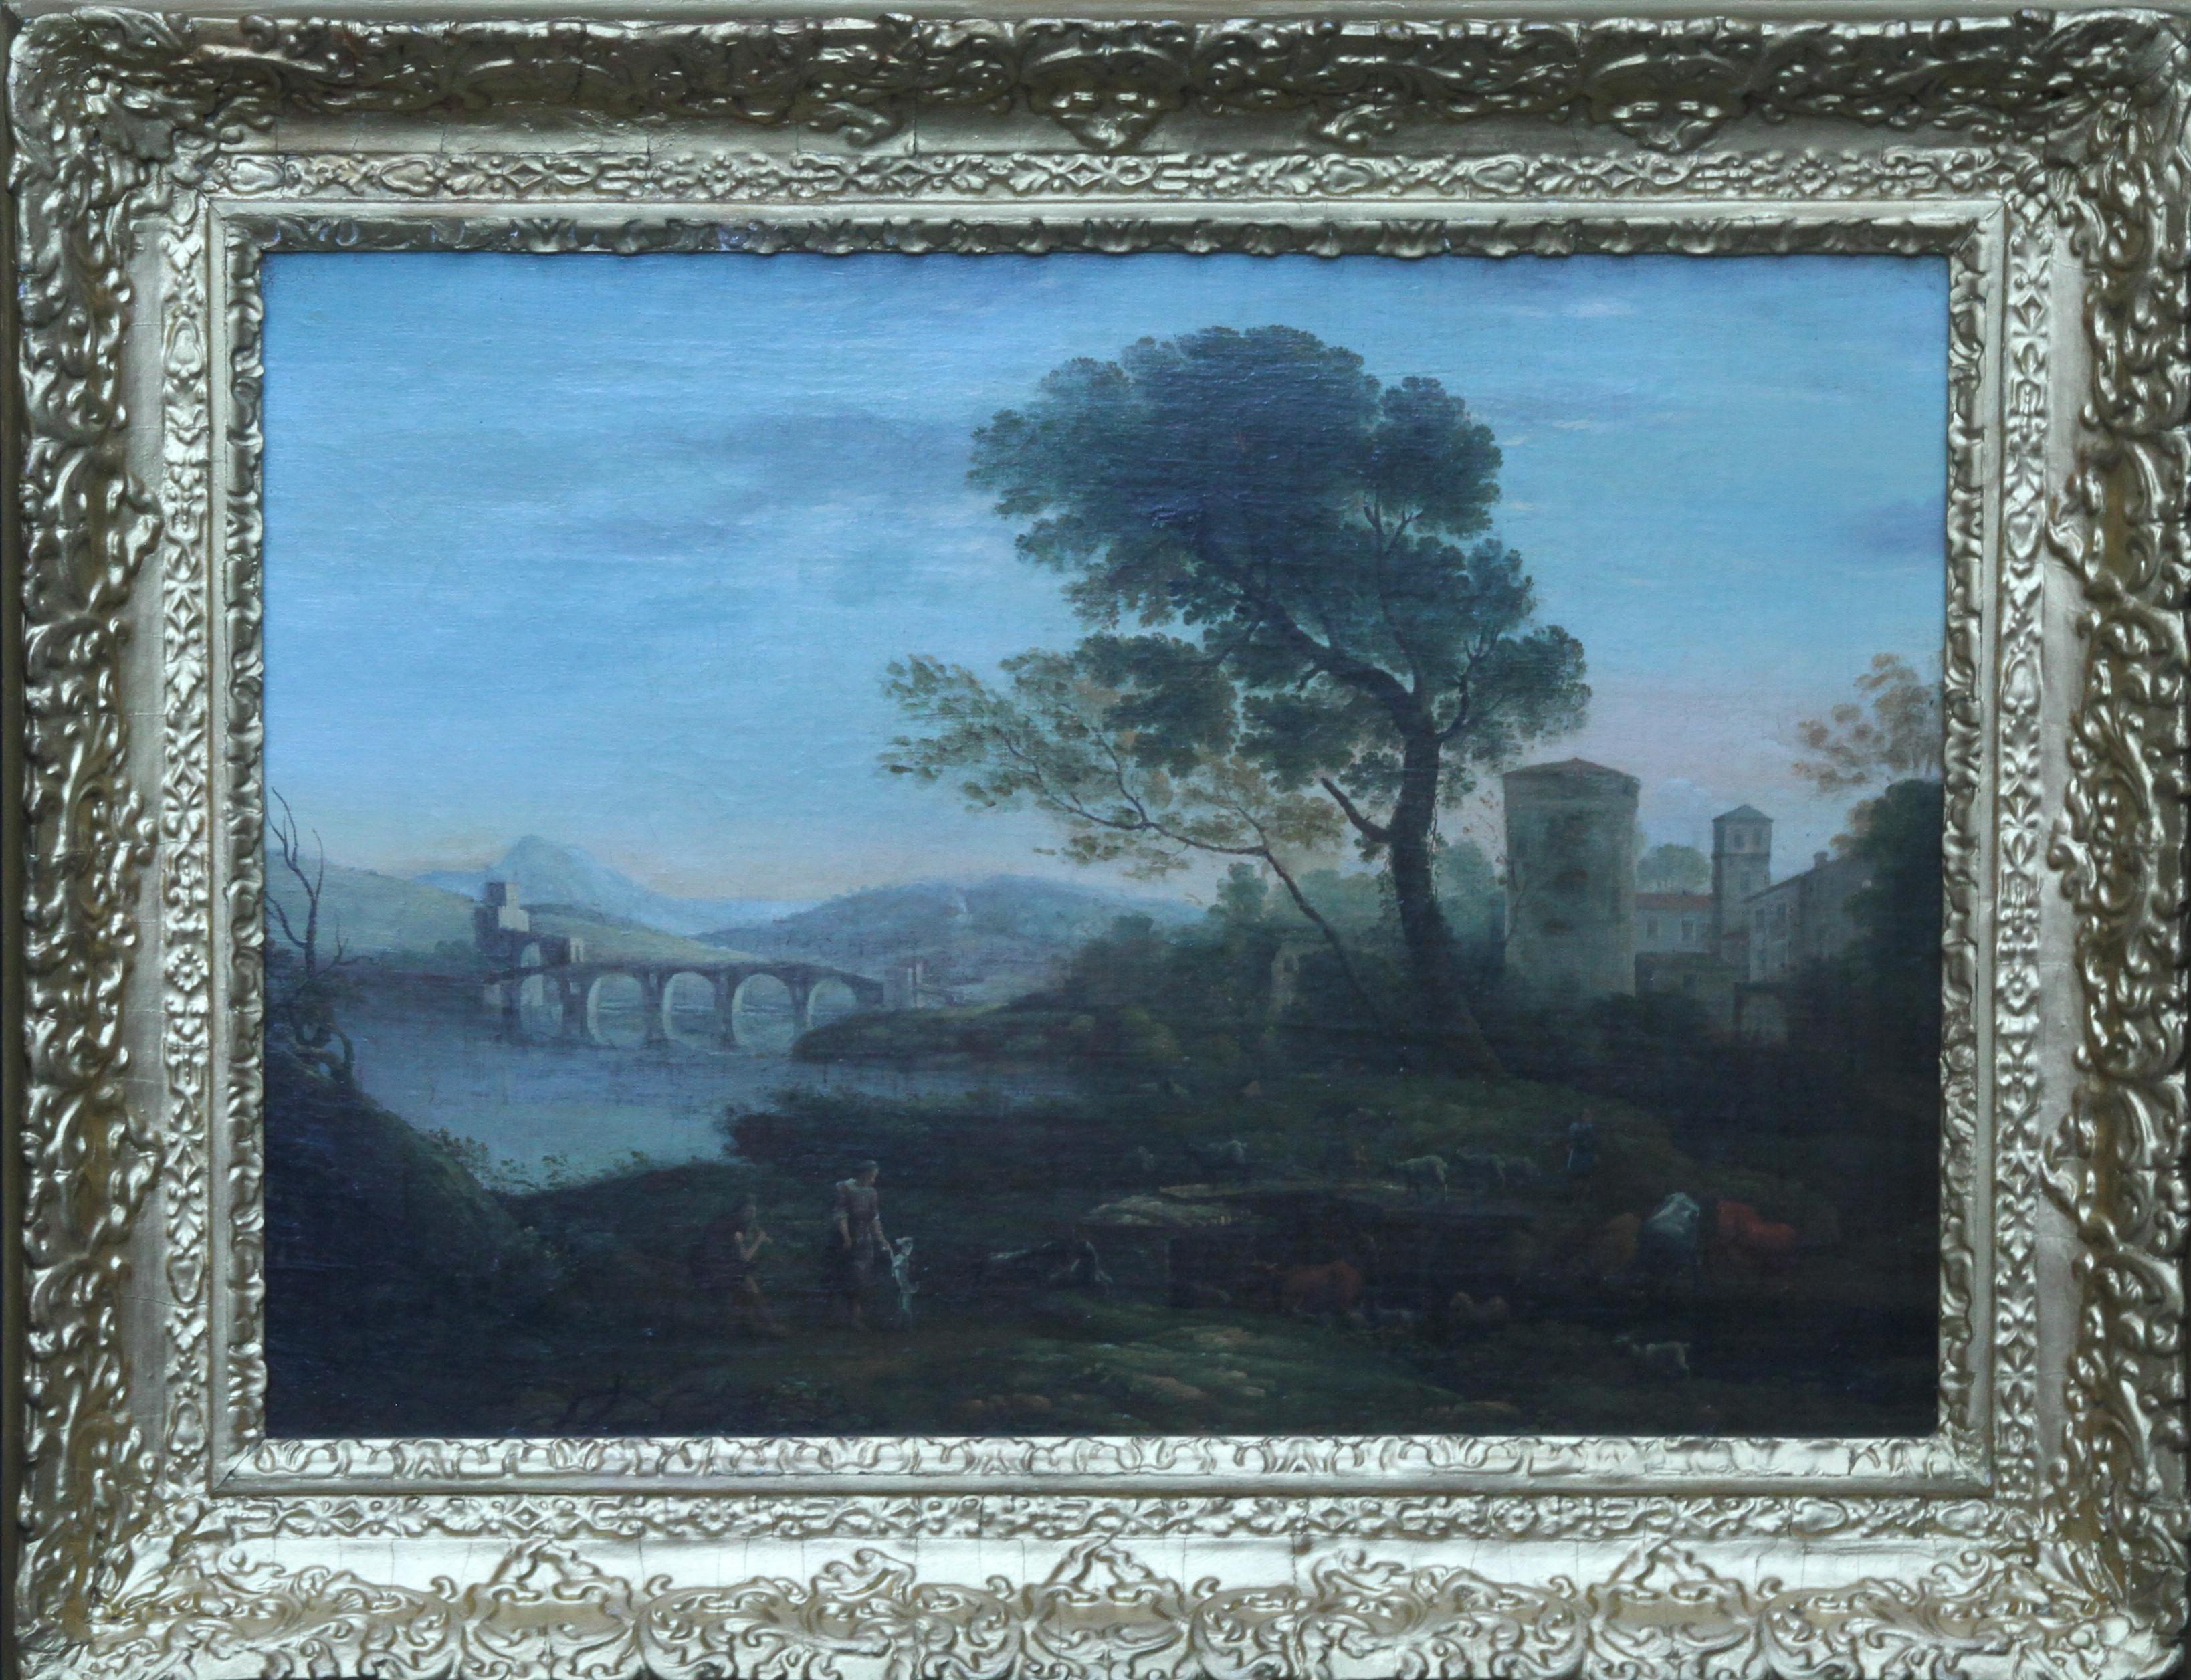 This fine Old Master  18th century Flemish oil painting of a classical landscape is by the circle of Jan Frans van Bloemen. In the foreground are figures with numerous cattle, sheep and goats. Behind are dwellings with a bridge over a river. The